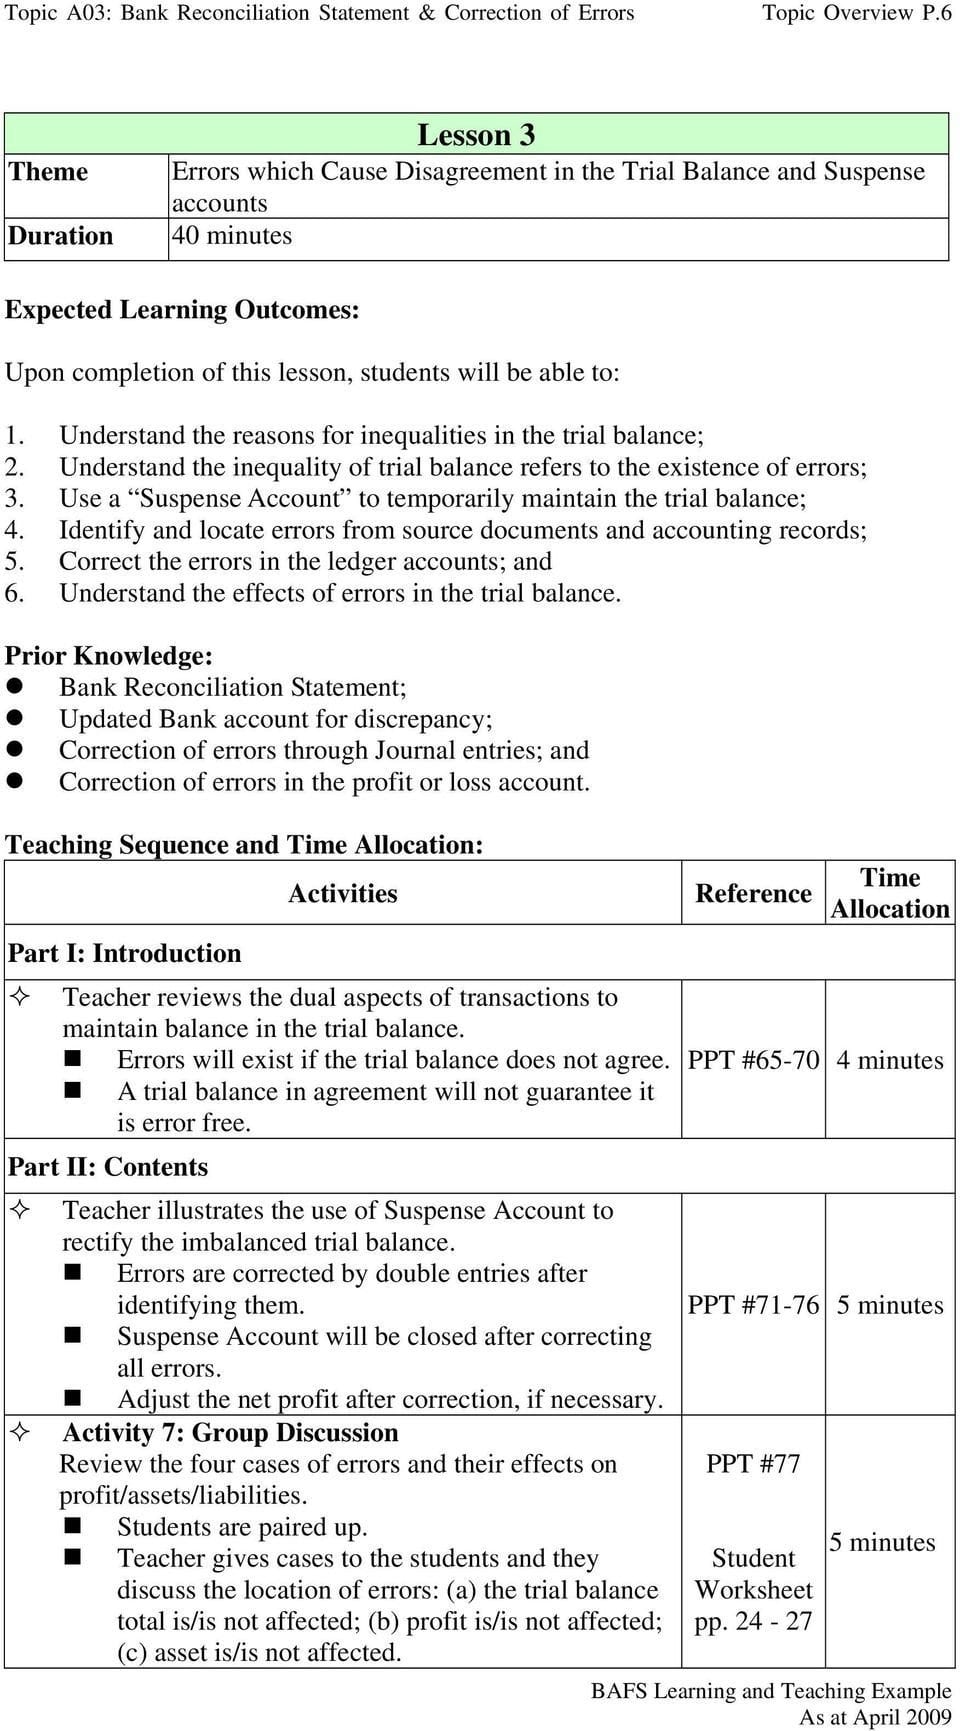 Reconciling An Account Worksheet Answers  Briefencounters Within Reconciling An Account Worksheet Answers